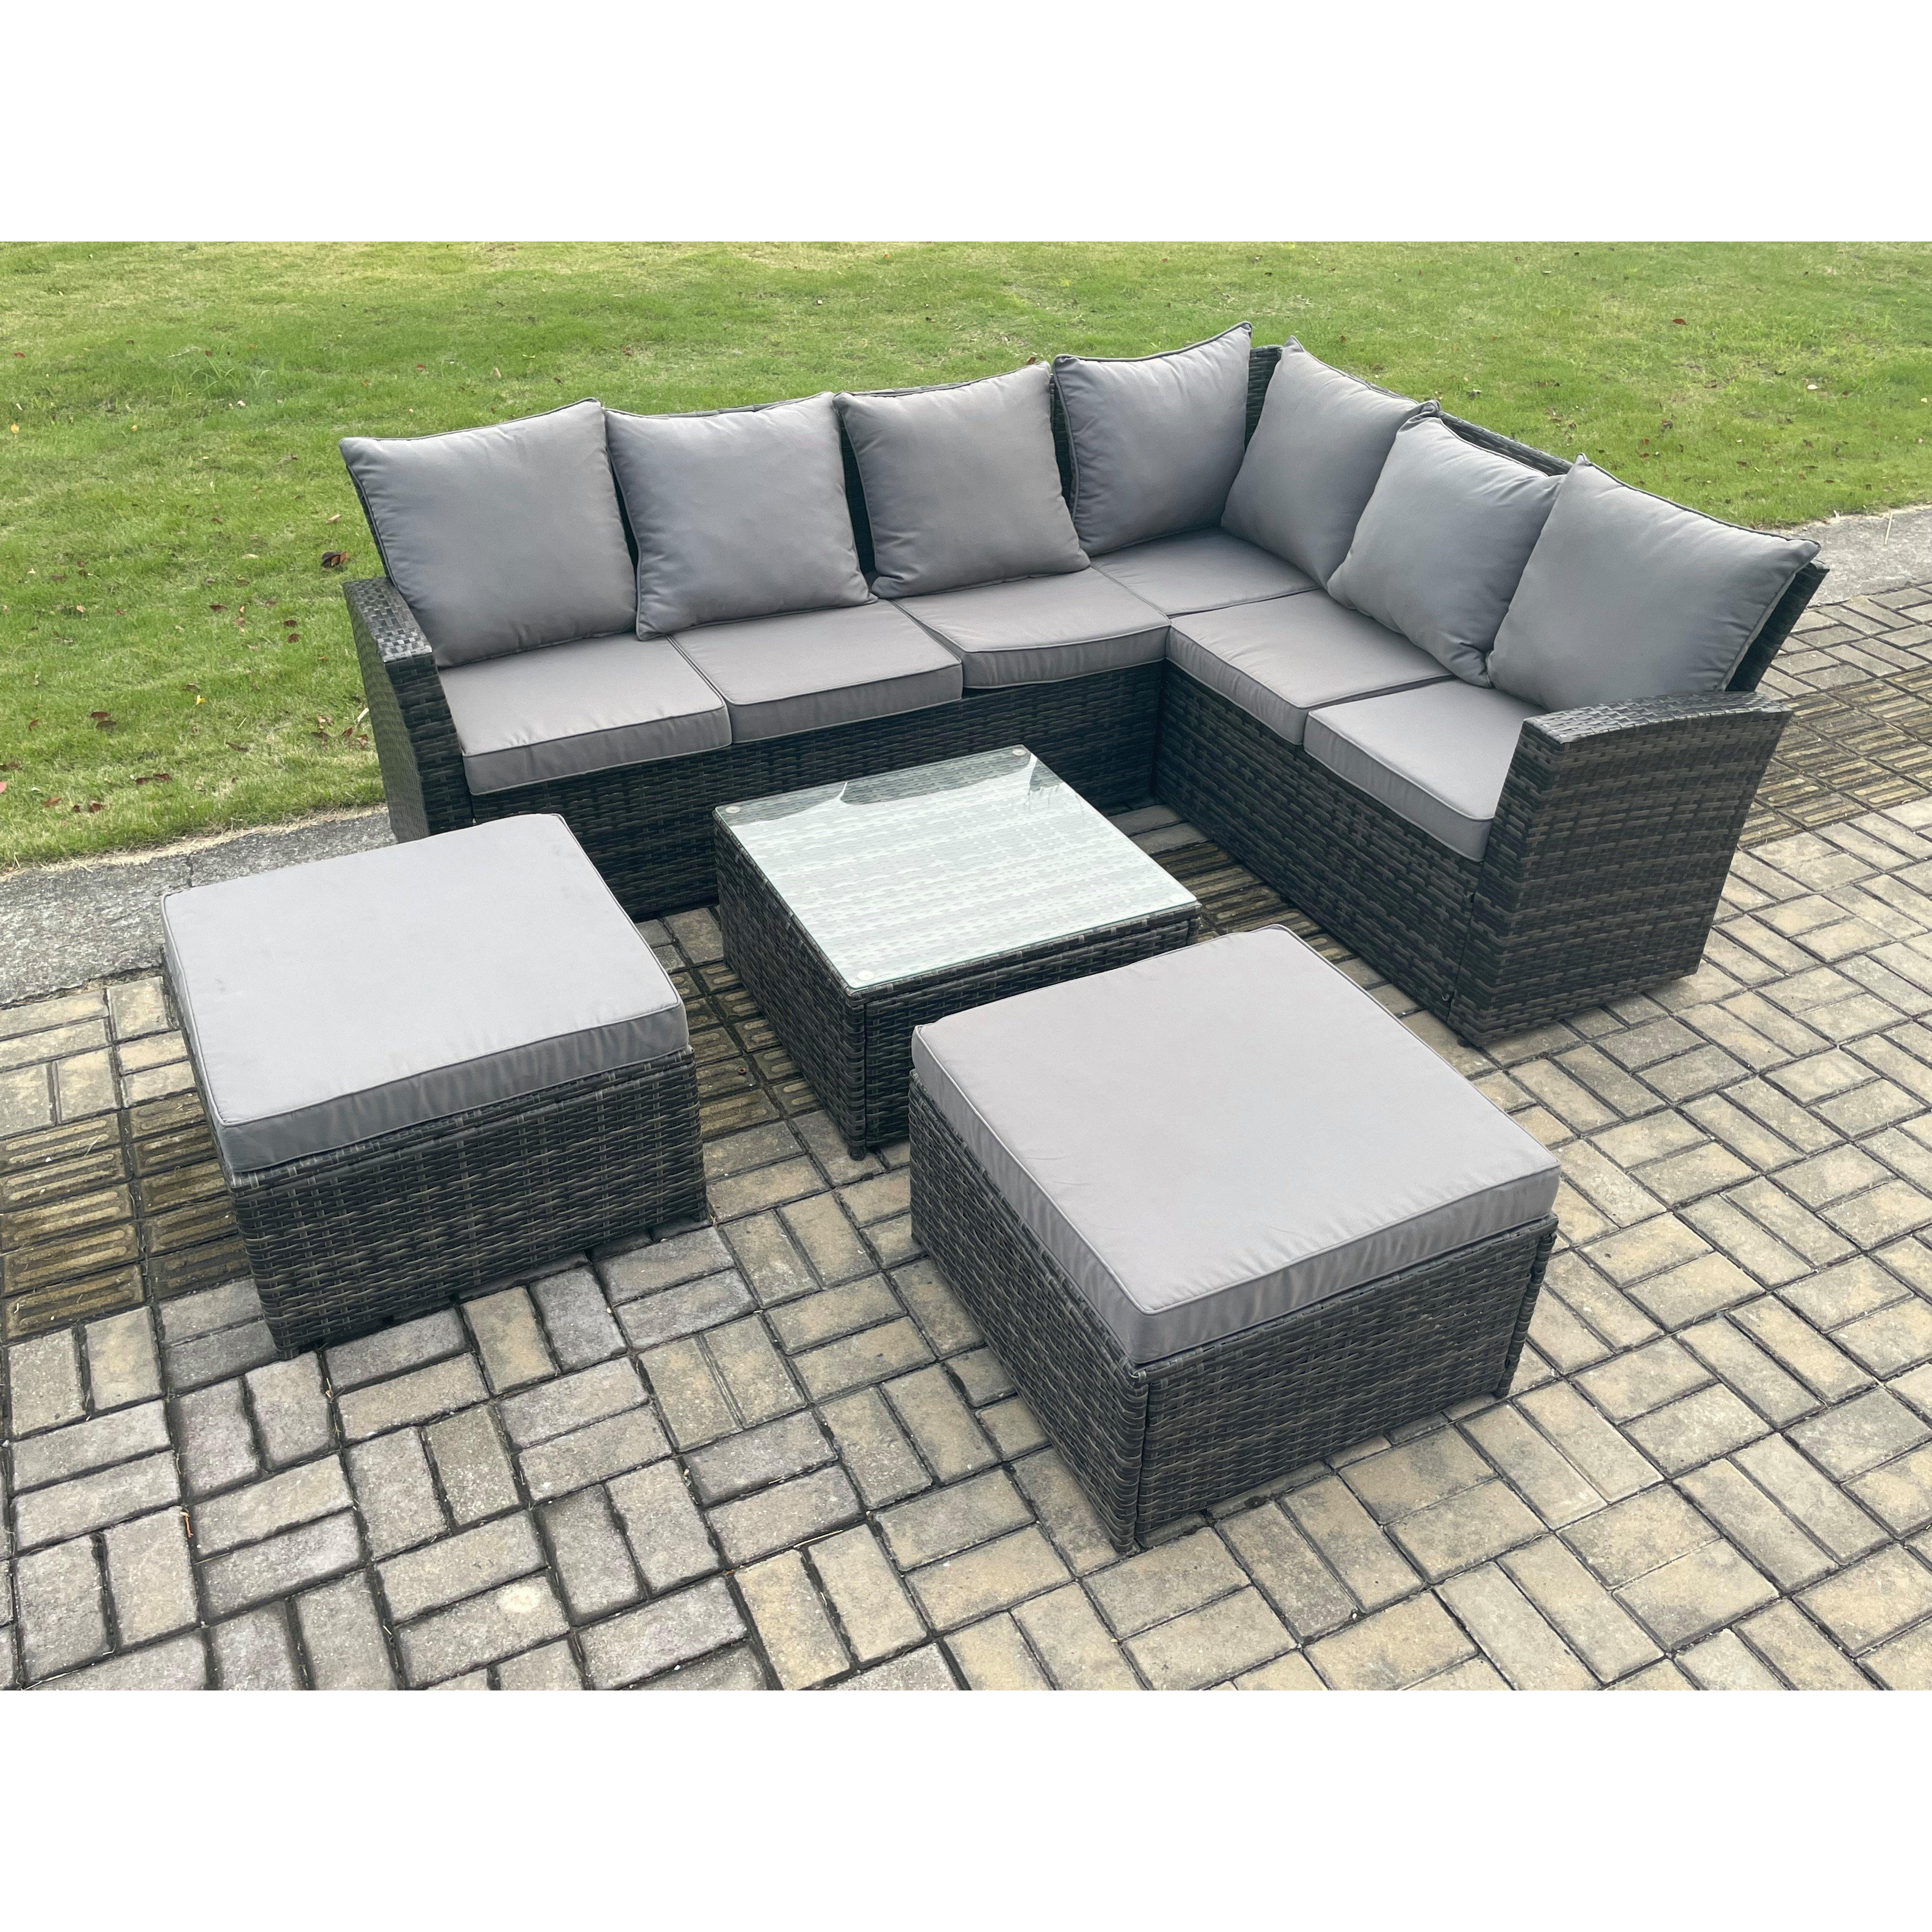 8 Seater Wicker PE Outdoor Garden Furniture Set High Back Rattan Corner Sofa Set with 2 Big Footstool Square Coffee Table - image 1